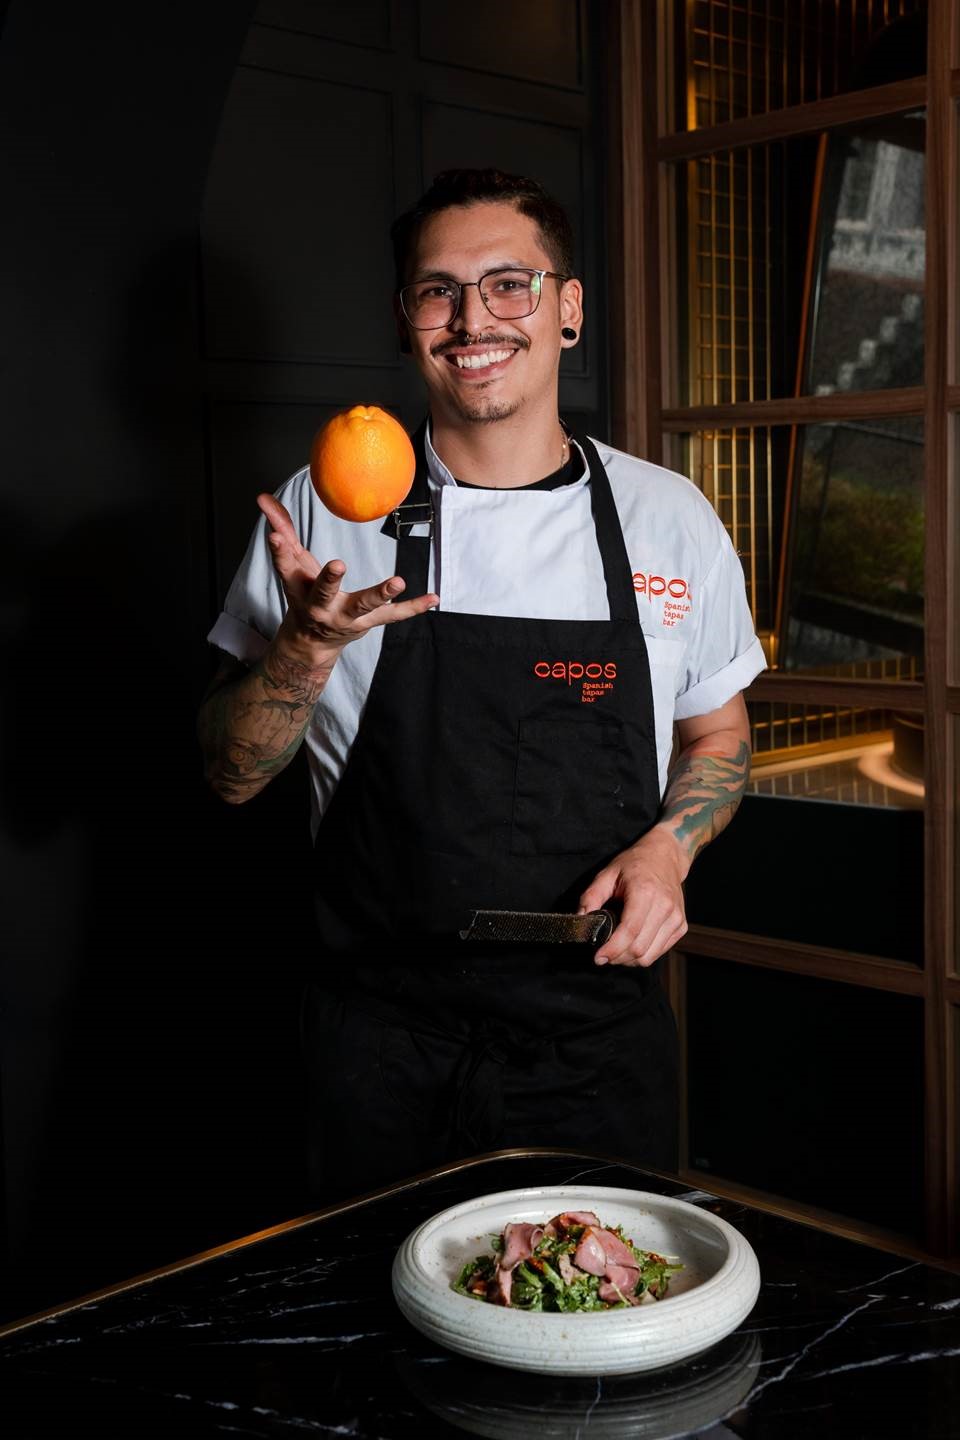 LUZ Bangkok Tapas Bar will welcome Bryan D. Ceron Serrano, Capos Hanoi’s head chef, on May 8 and 9, to craft the degustation menu with optional wine pairing.